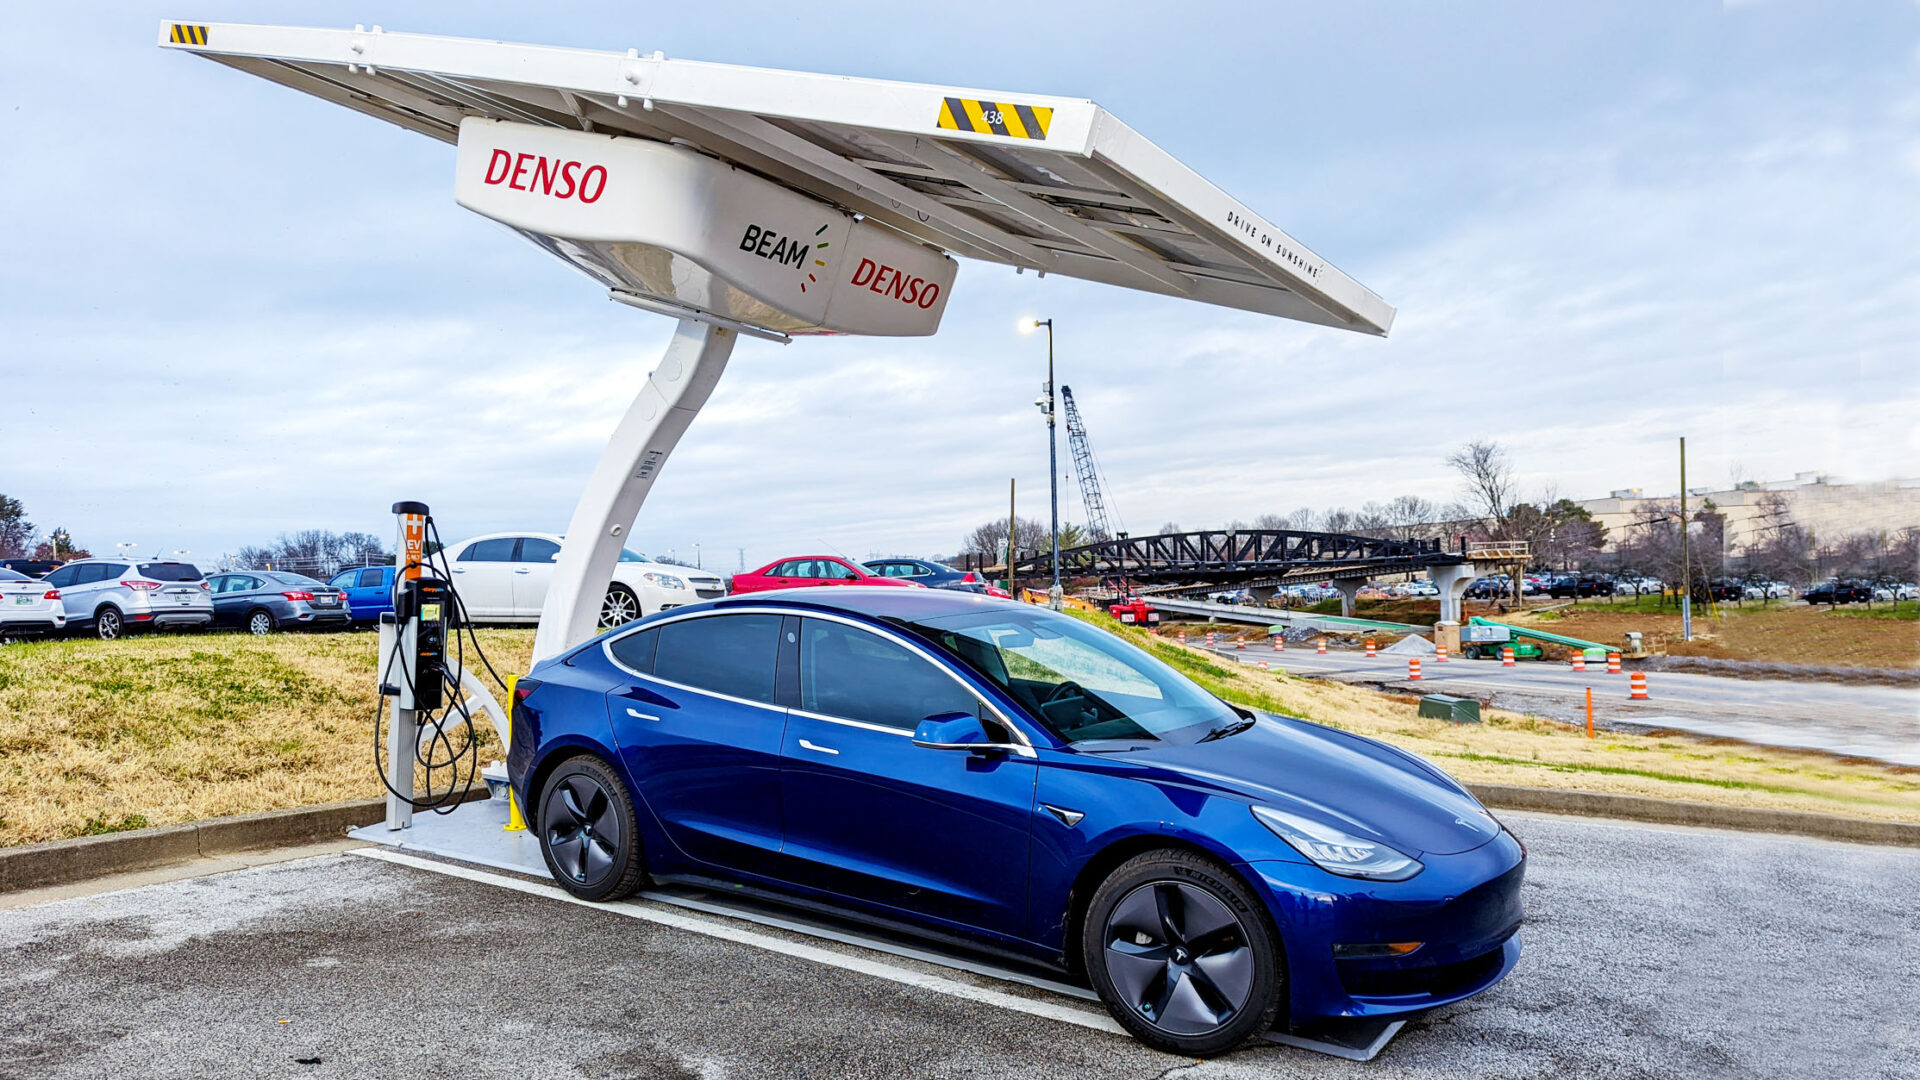 DENSO Deploys Beam Global Sustainable Electric Vehicle Charging Systems